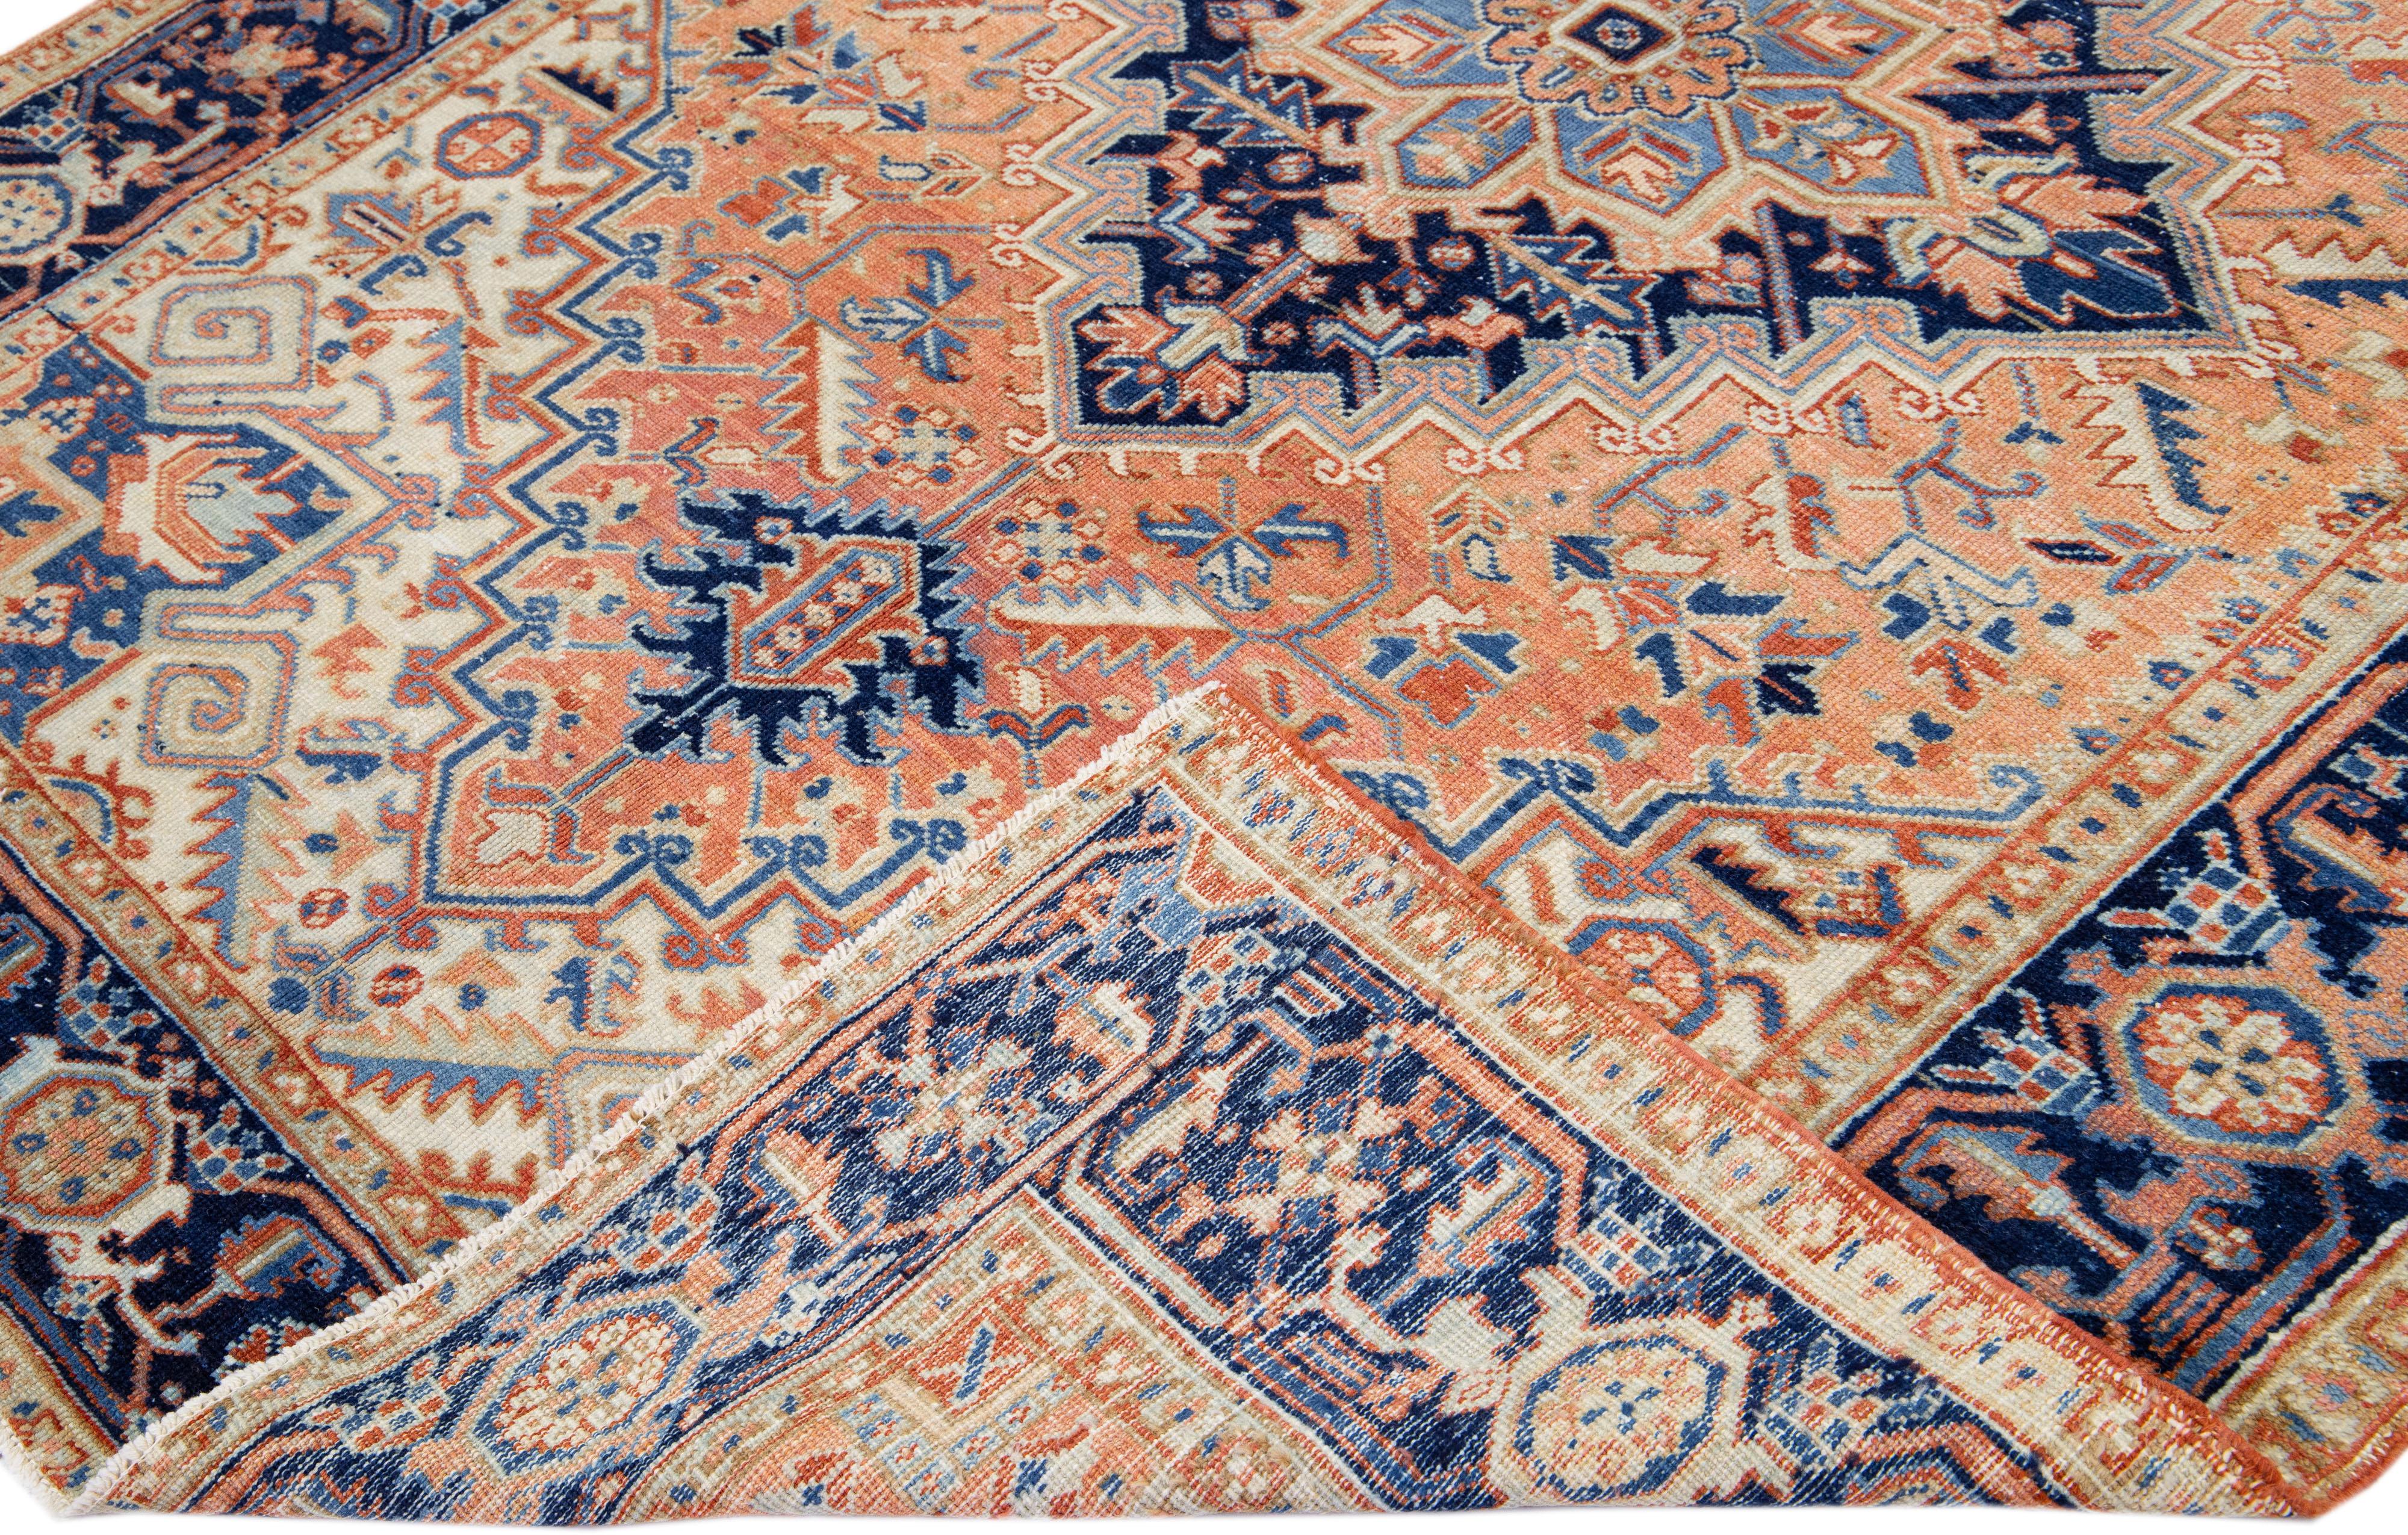 Beautiful antique Heriz hand-knotted wool rug with a peach color field. This Persian rug has a blue frame with beige accents in a gorgeous all-over geometric floral medallion design.

This rug measures: 6'6